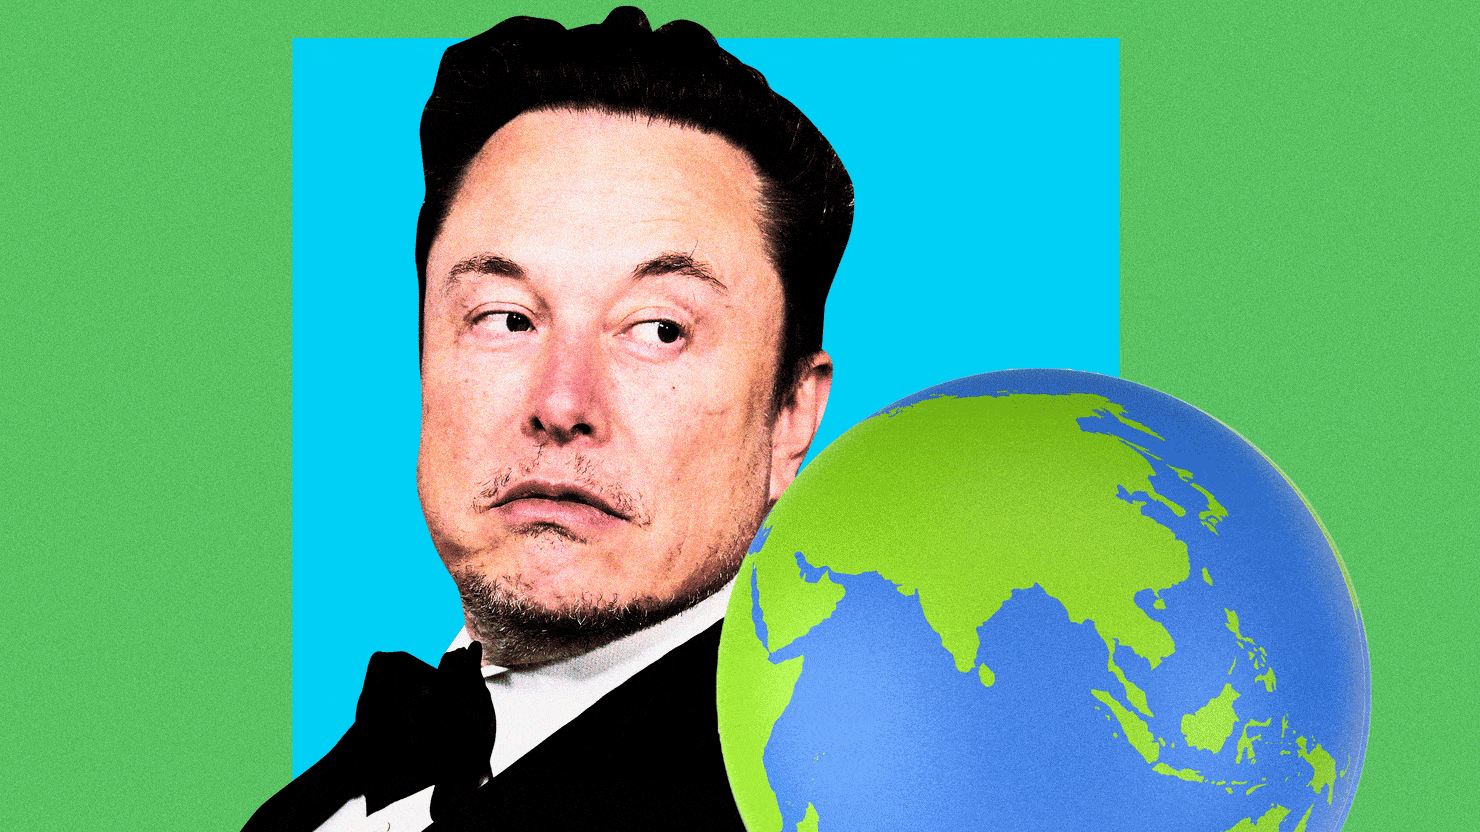 The Mounting List of Global VIPs Who Detest Elon Musk